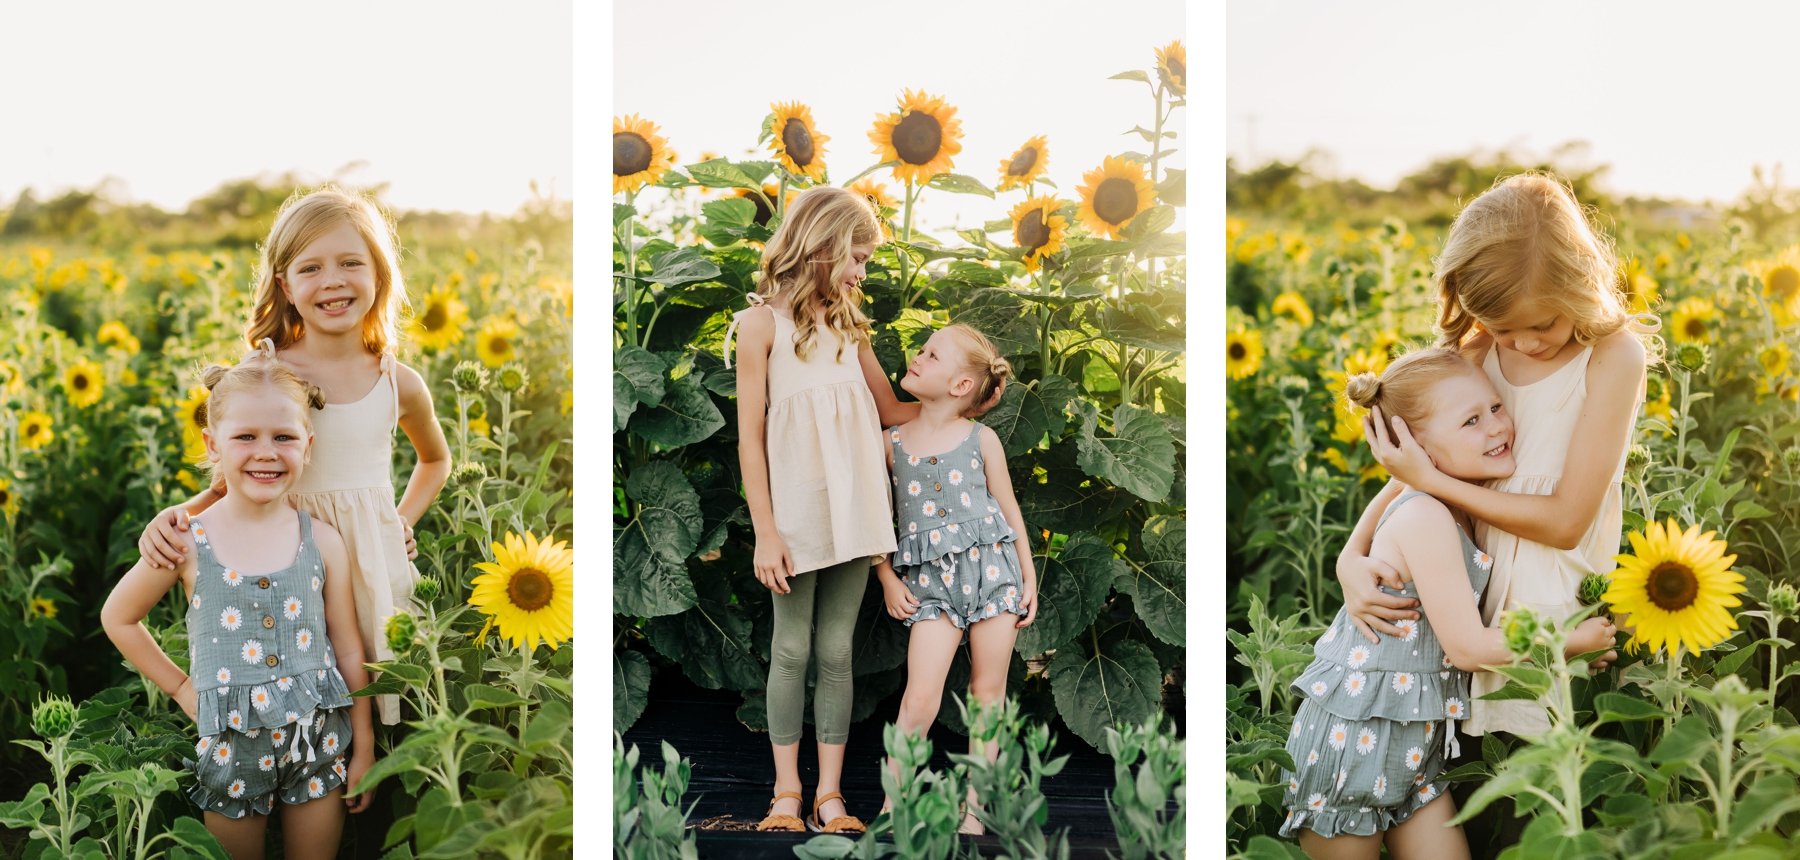 Mommy and me session at Green Valley Gardens in North Dallas, Texas. | Dallas Family Photographer | Green Valley Gardens 